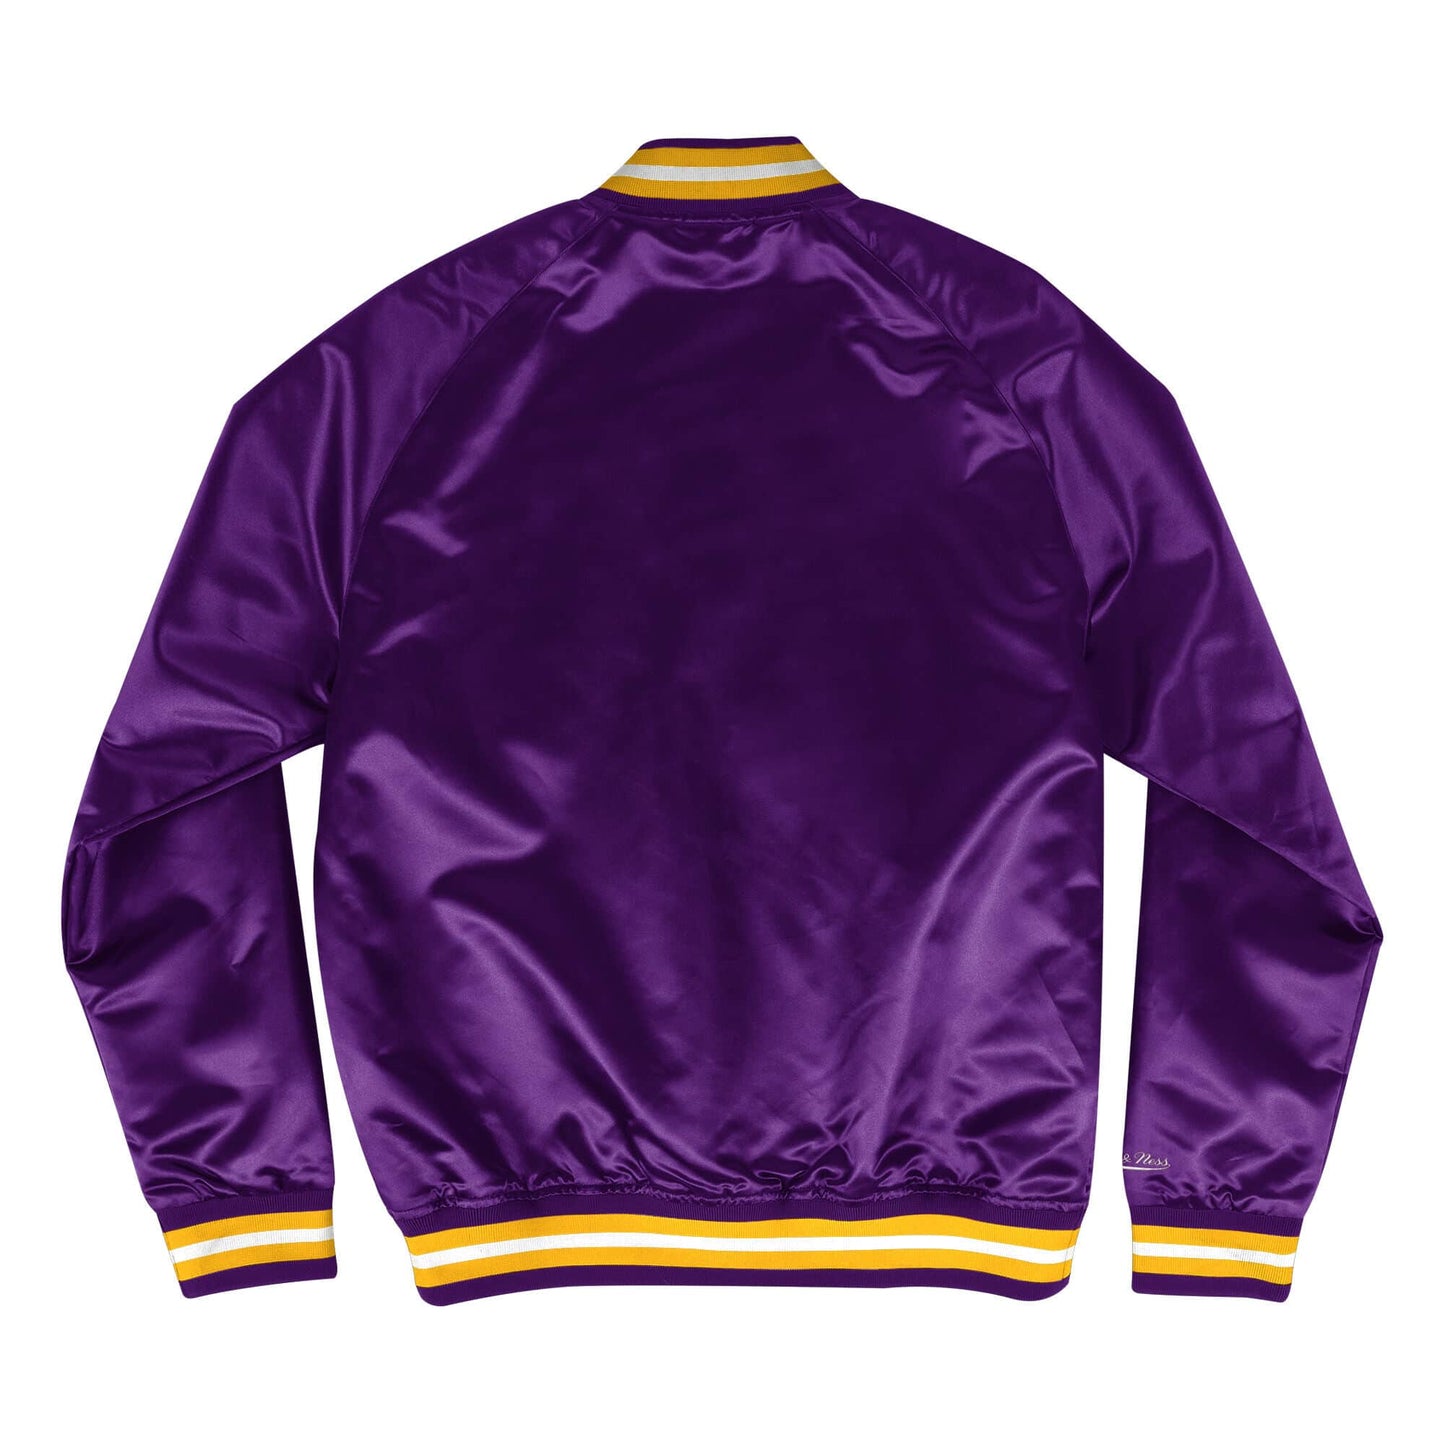 Los Angeles Lakers Mitchell & Ness Mens Light Weight Satin Jacket - Purple